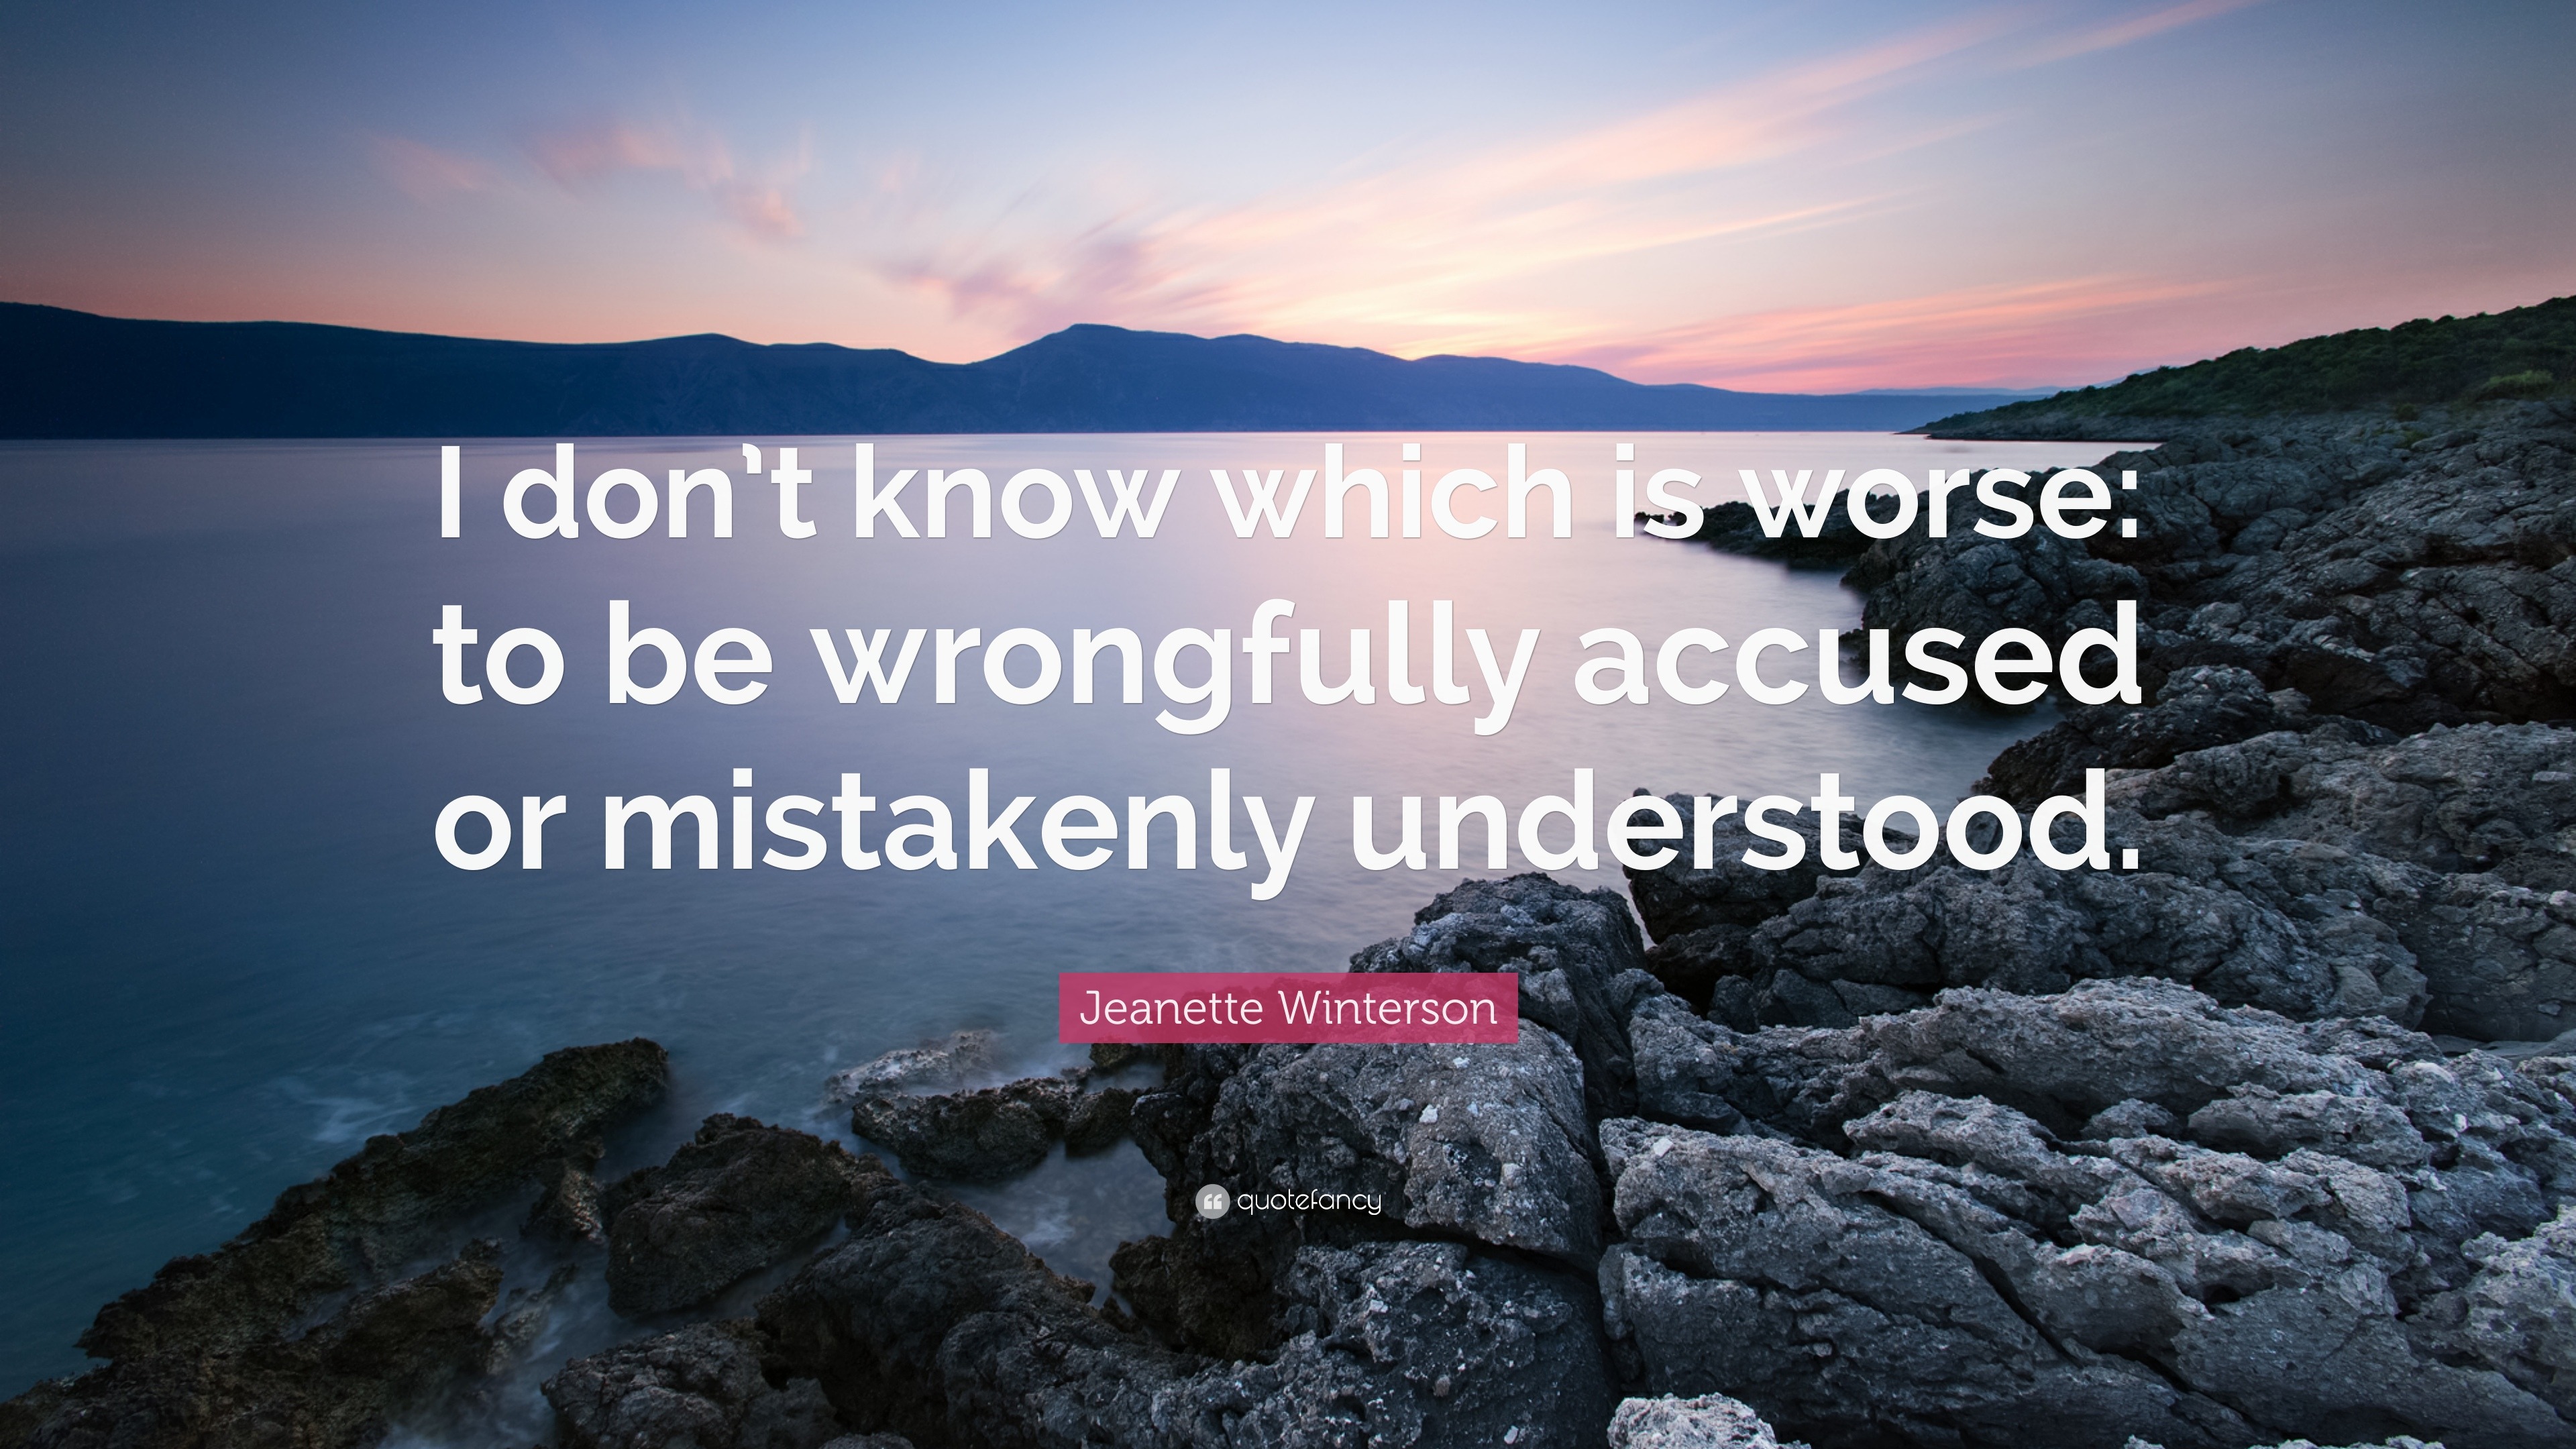 Jeanette Winterson Quote: “I don’t know which is worse: to be